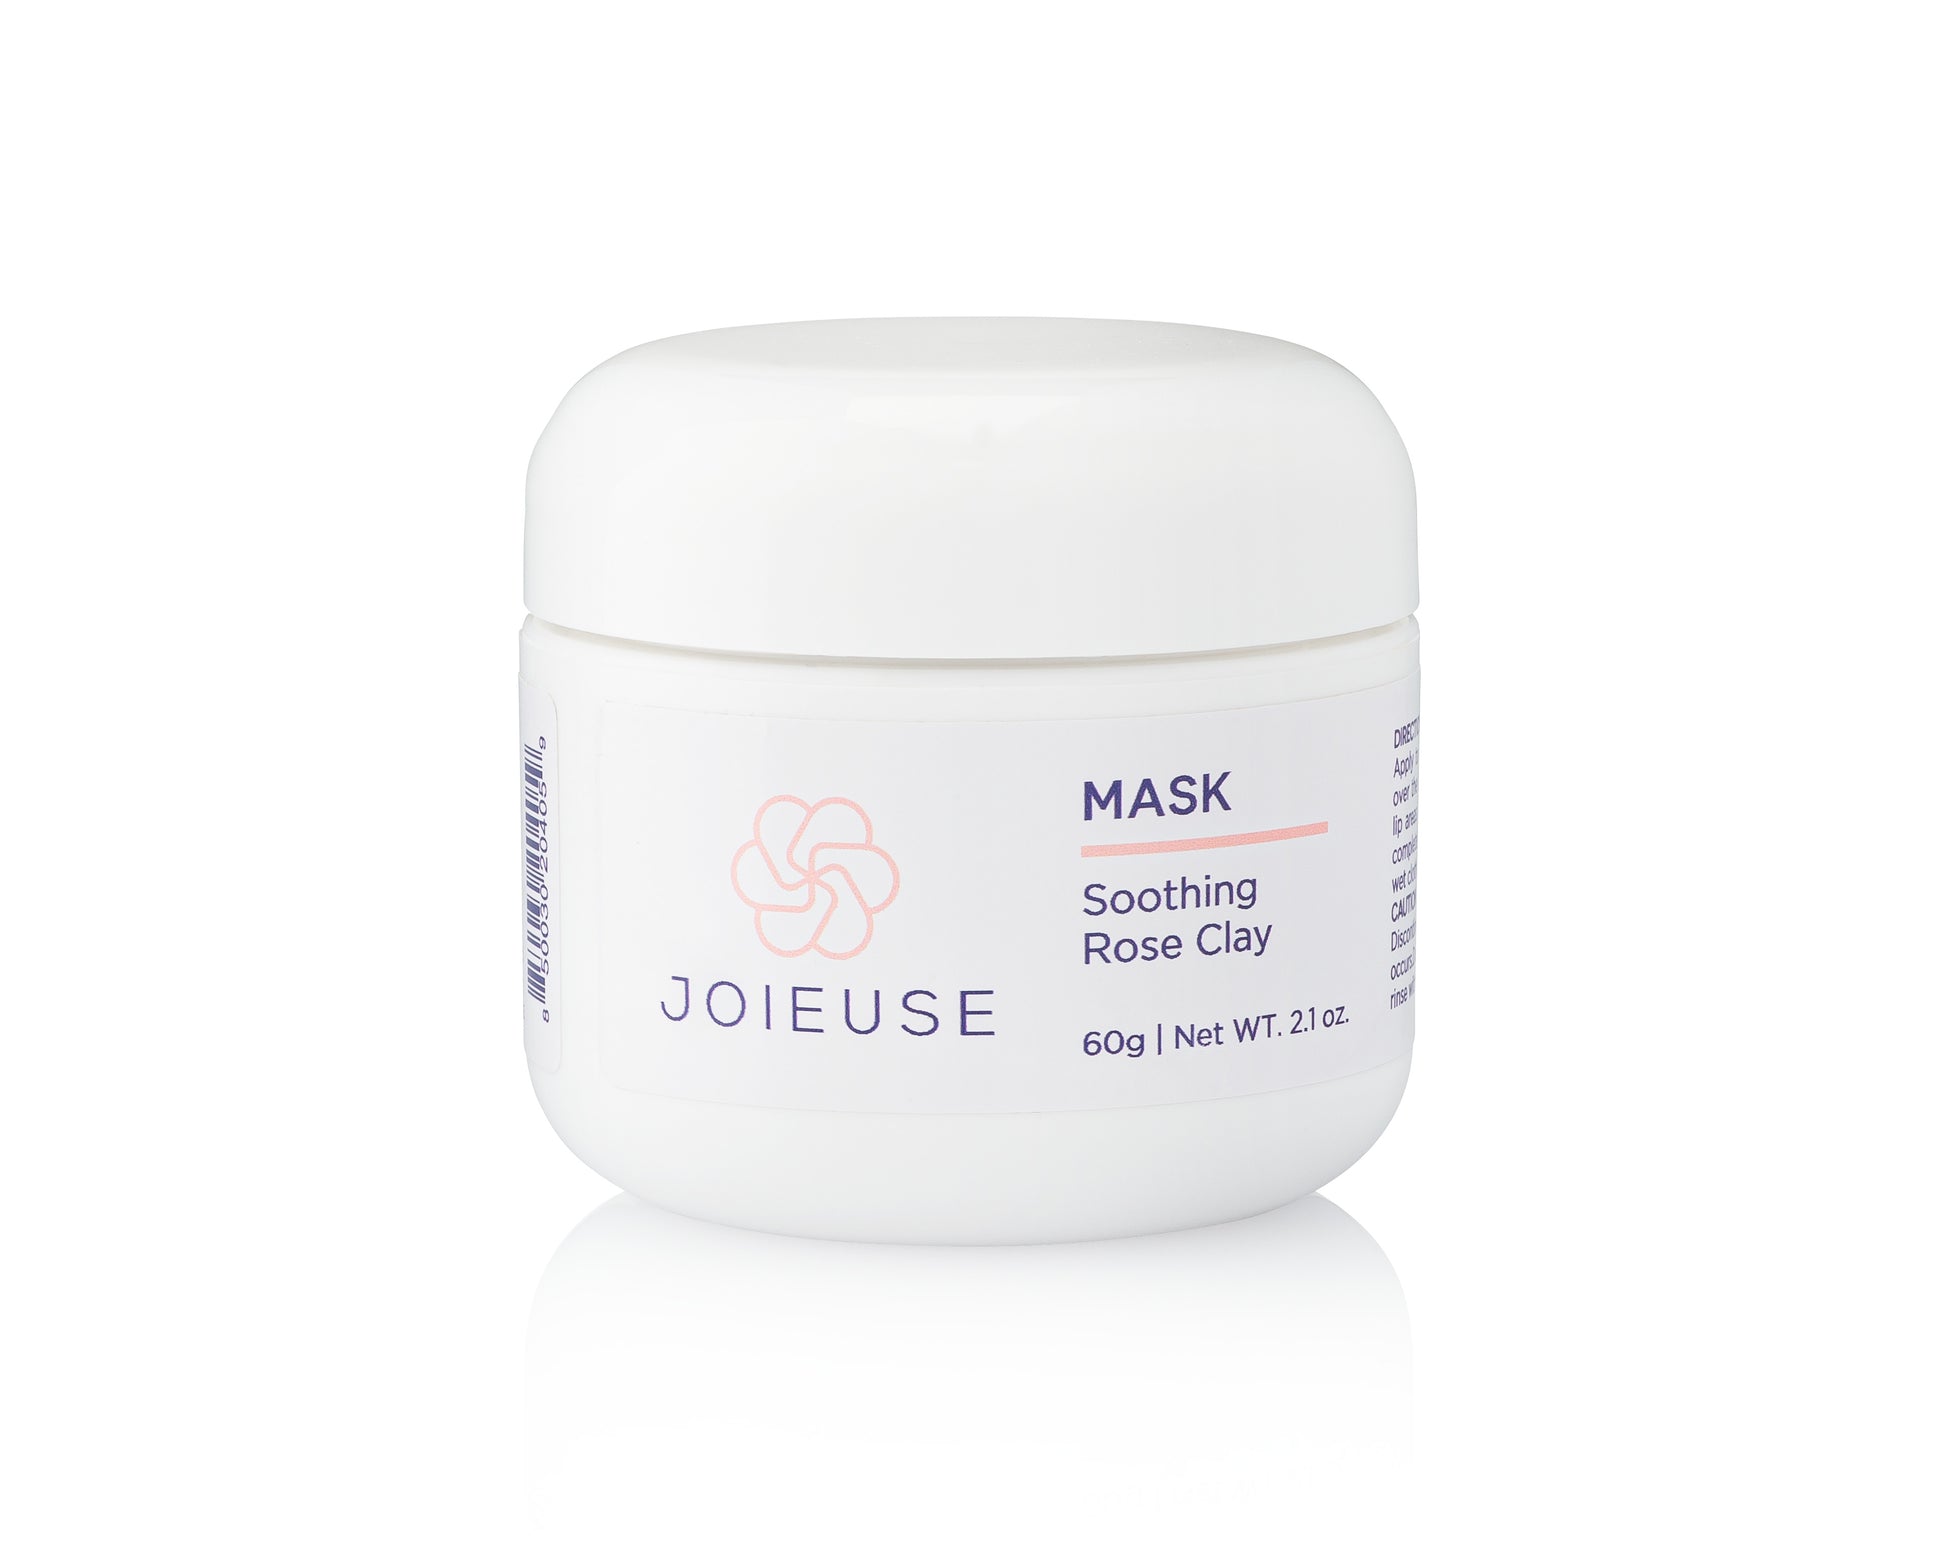 Joieuse Soothing Rose Clay Mask